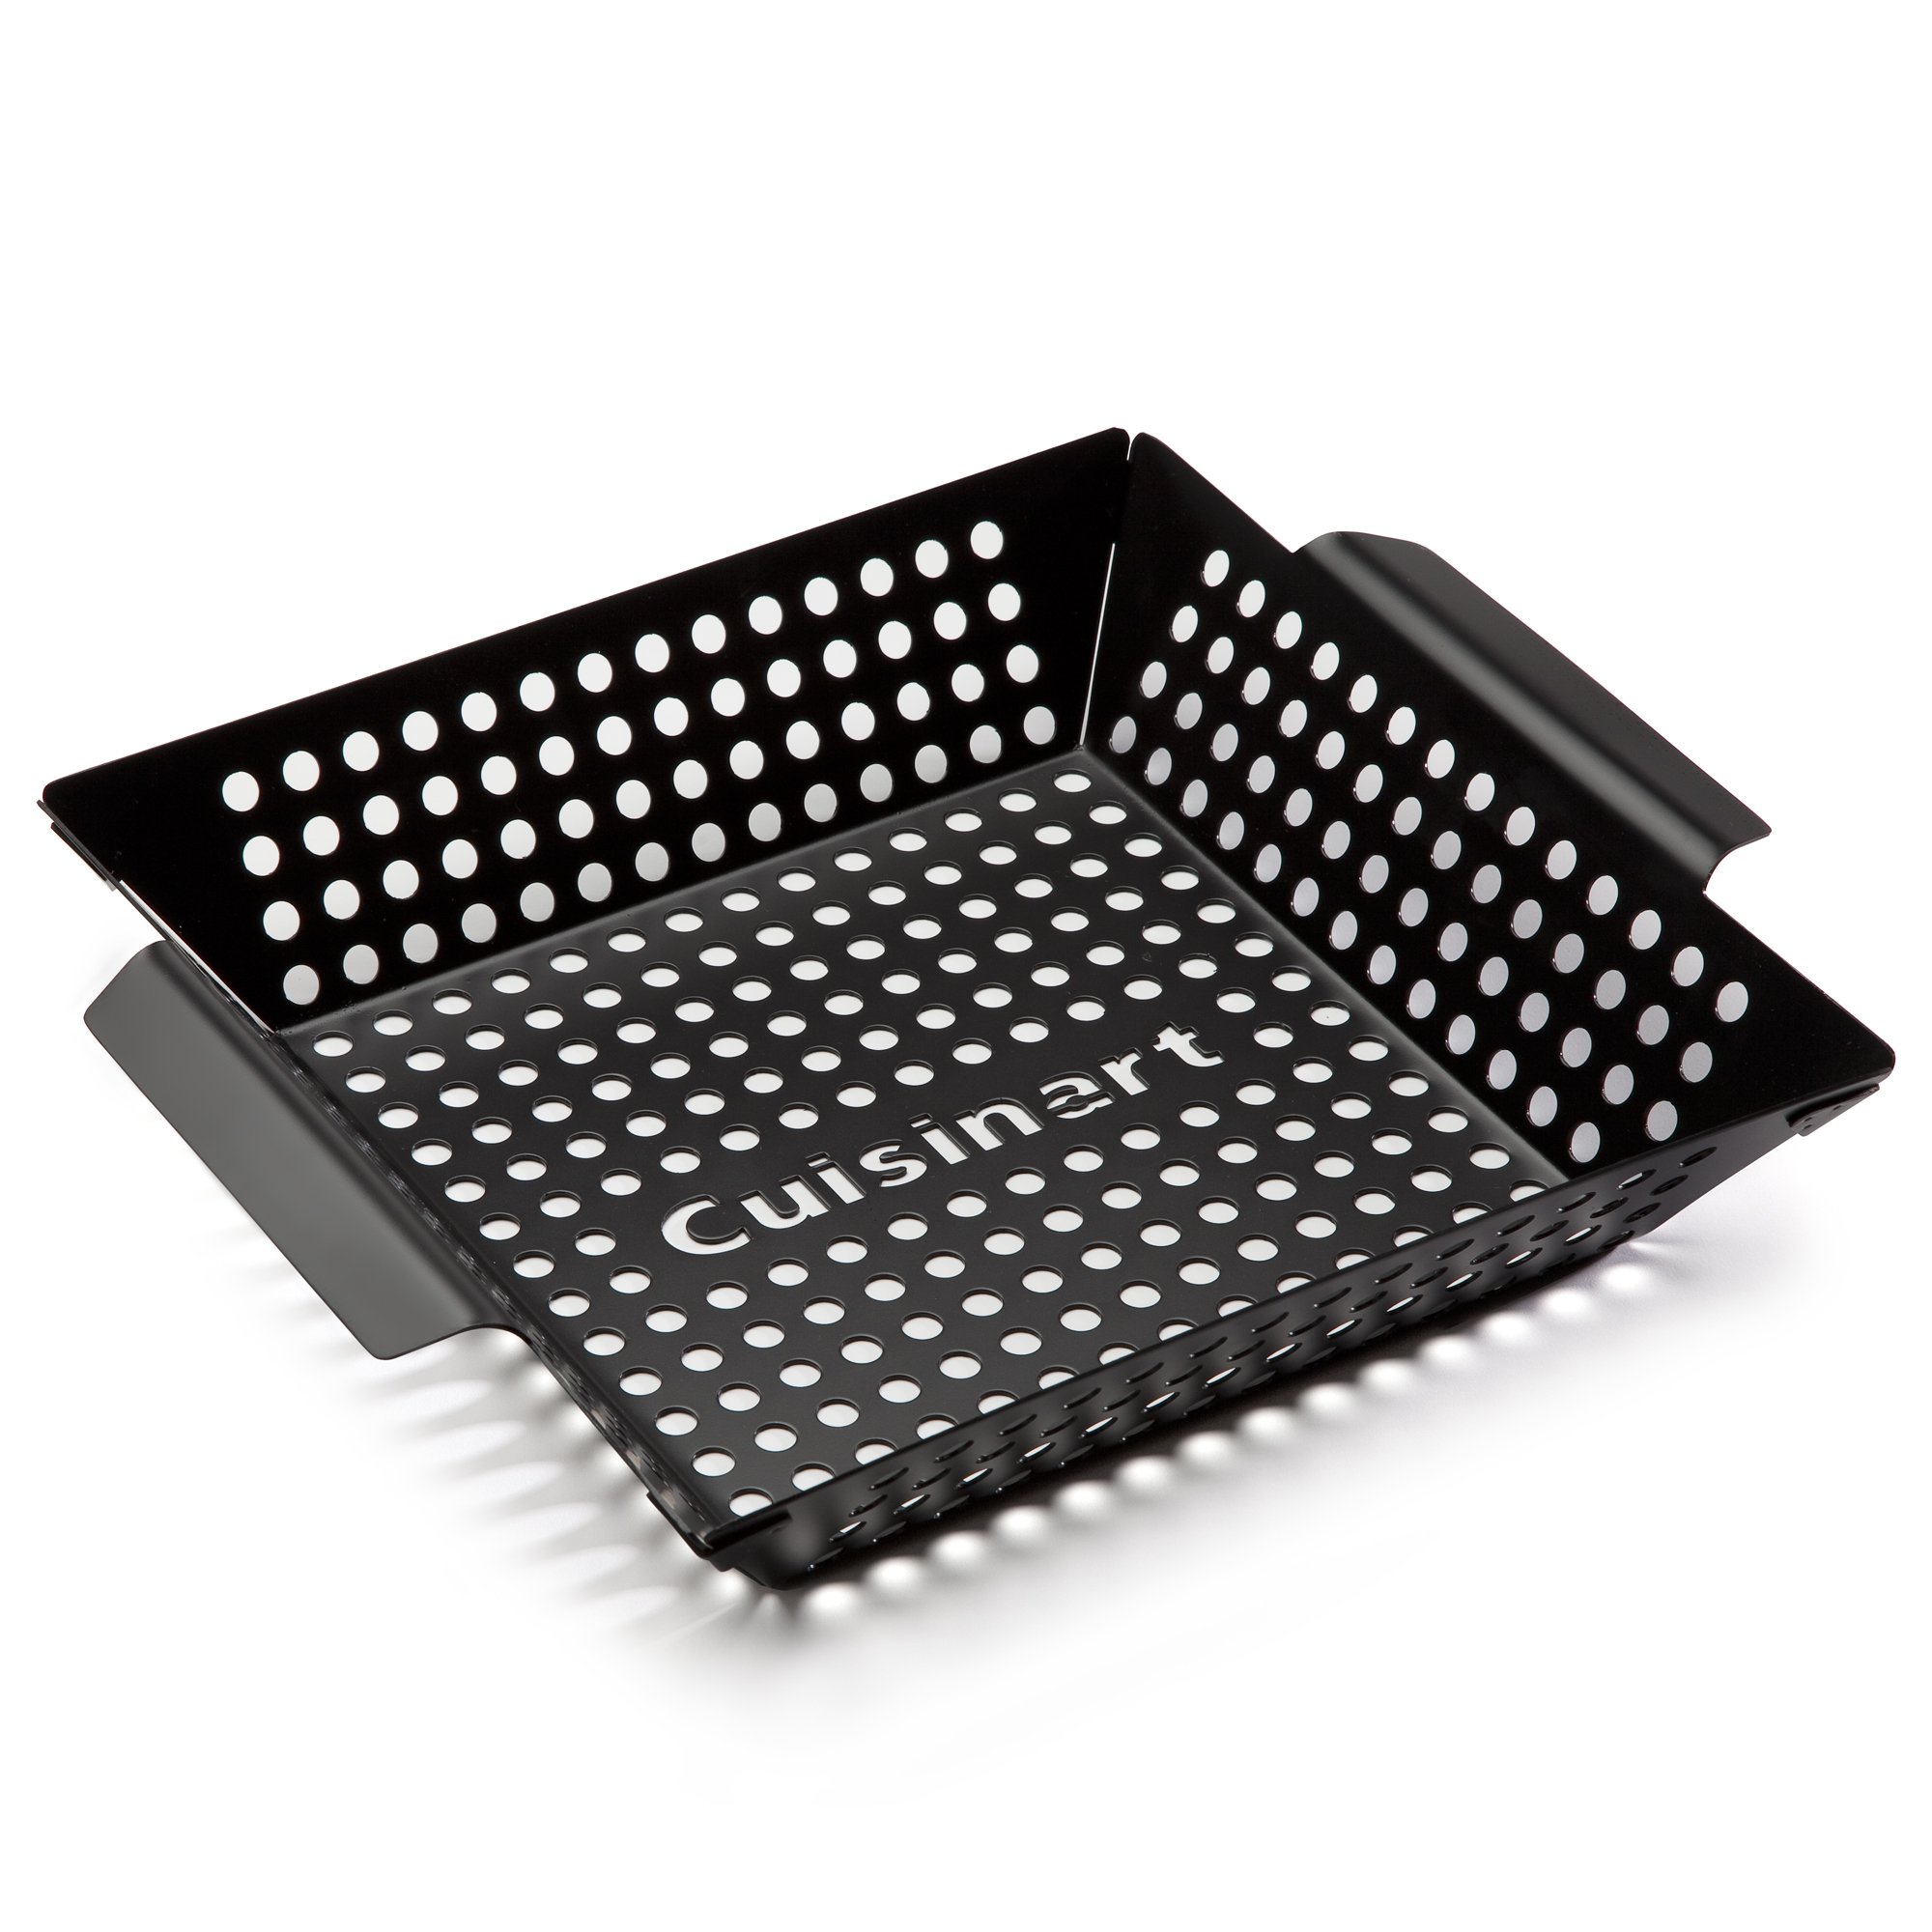 Cuisinart Non-Stick Grill Wok 11" x 11"  $10.27 + Free Shipping w/ Prime or Orders $25+